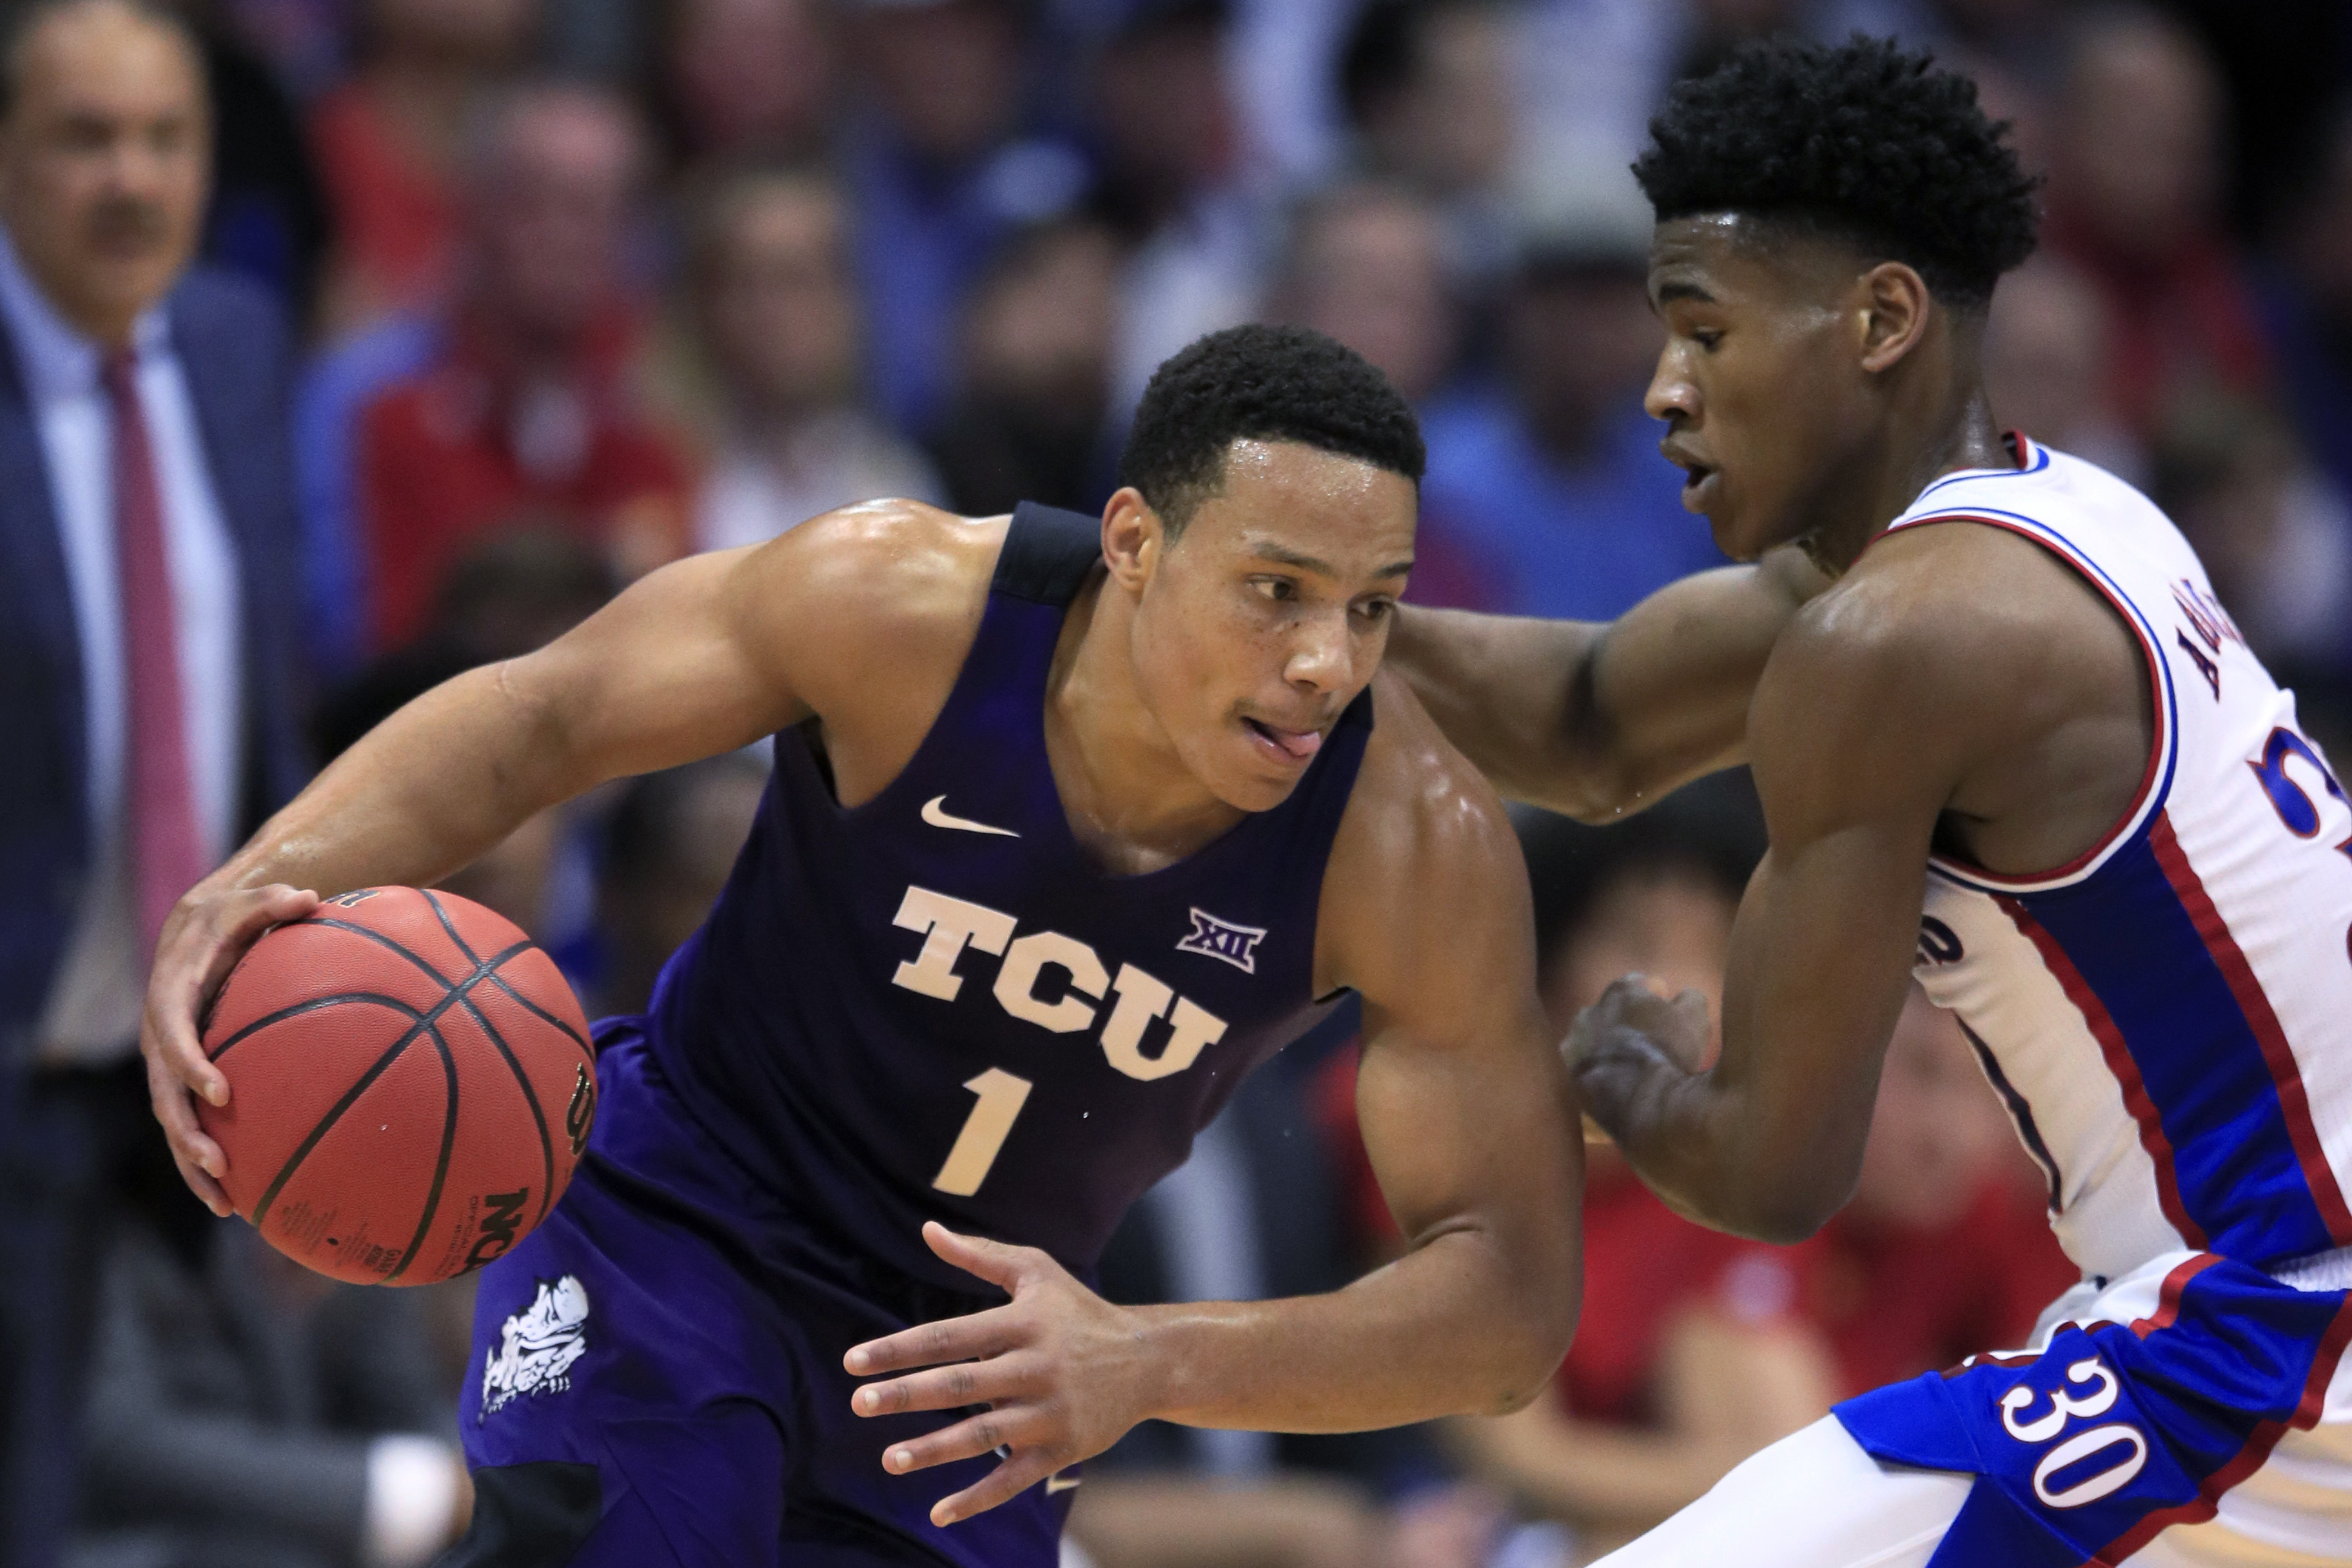 NBA Draft 2020: TCU's Desmond Bane could be a good pick for Sixers